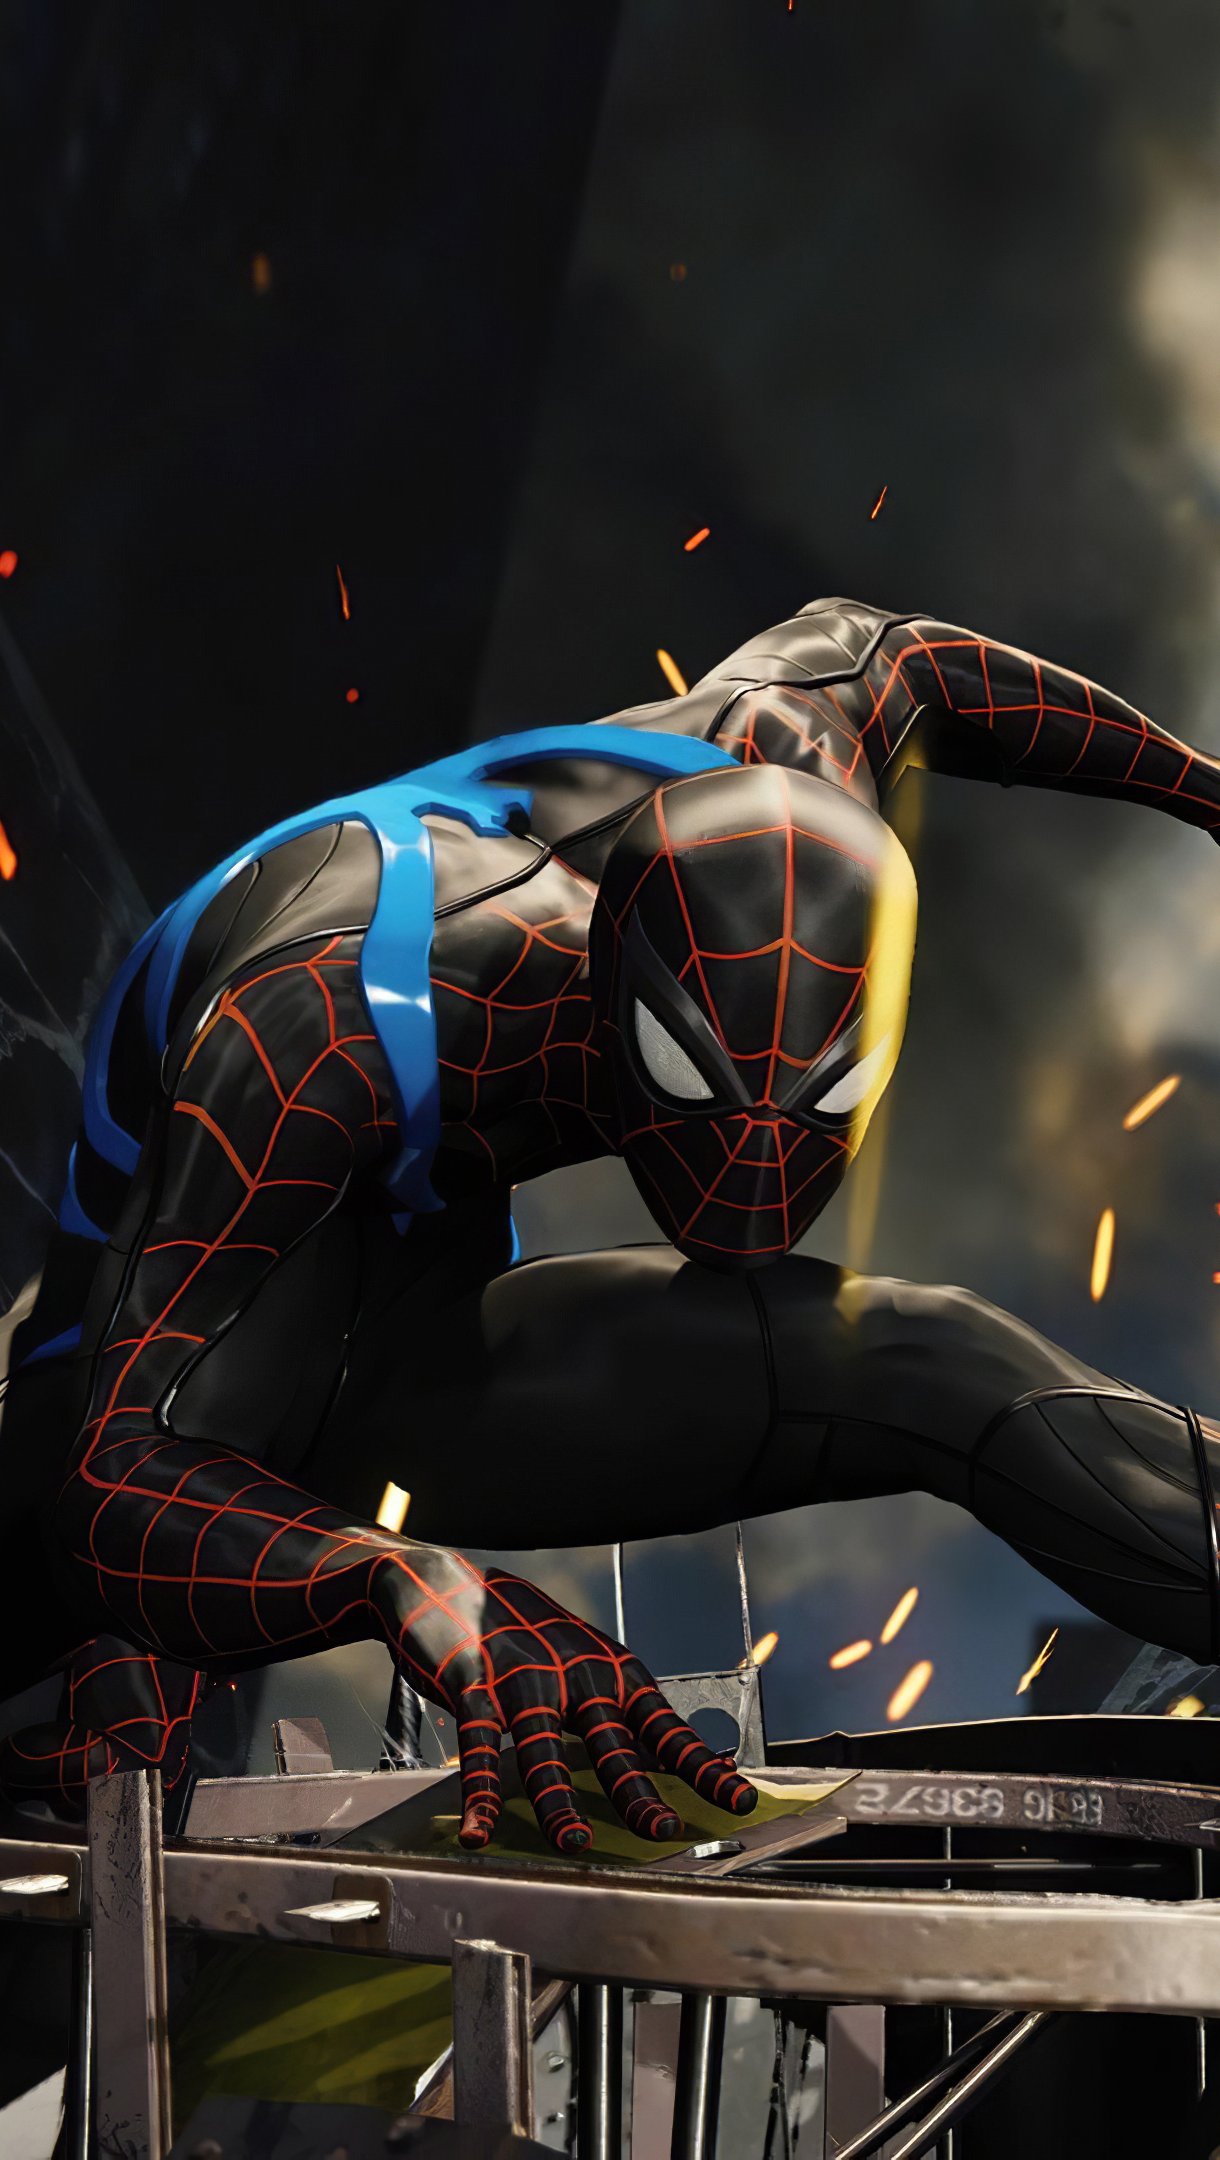 Spiderman blue and black suit Wallpaper 4k Ultra HD